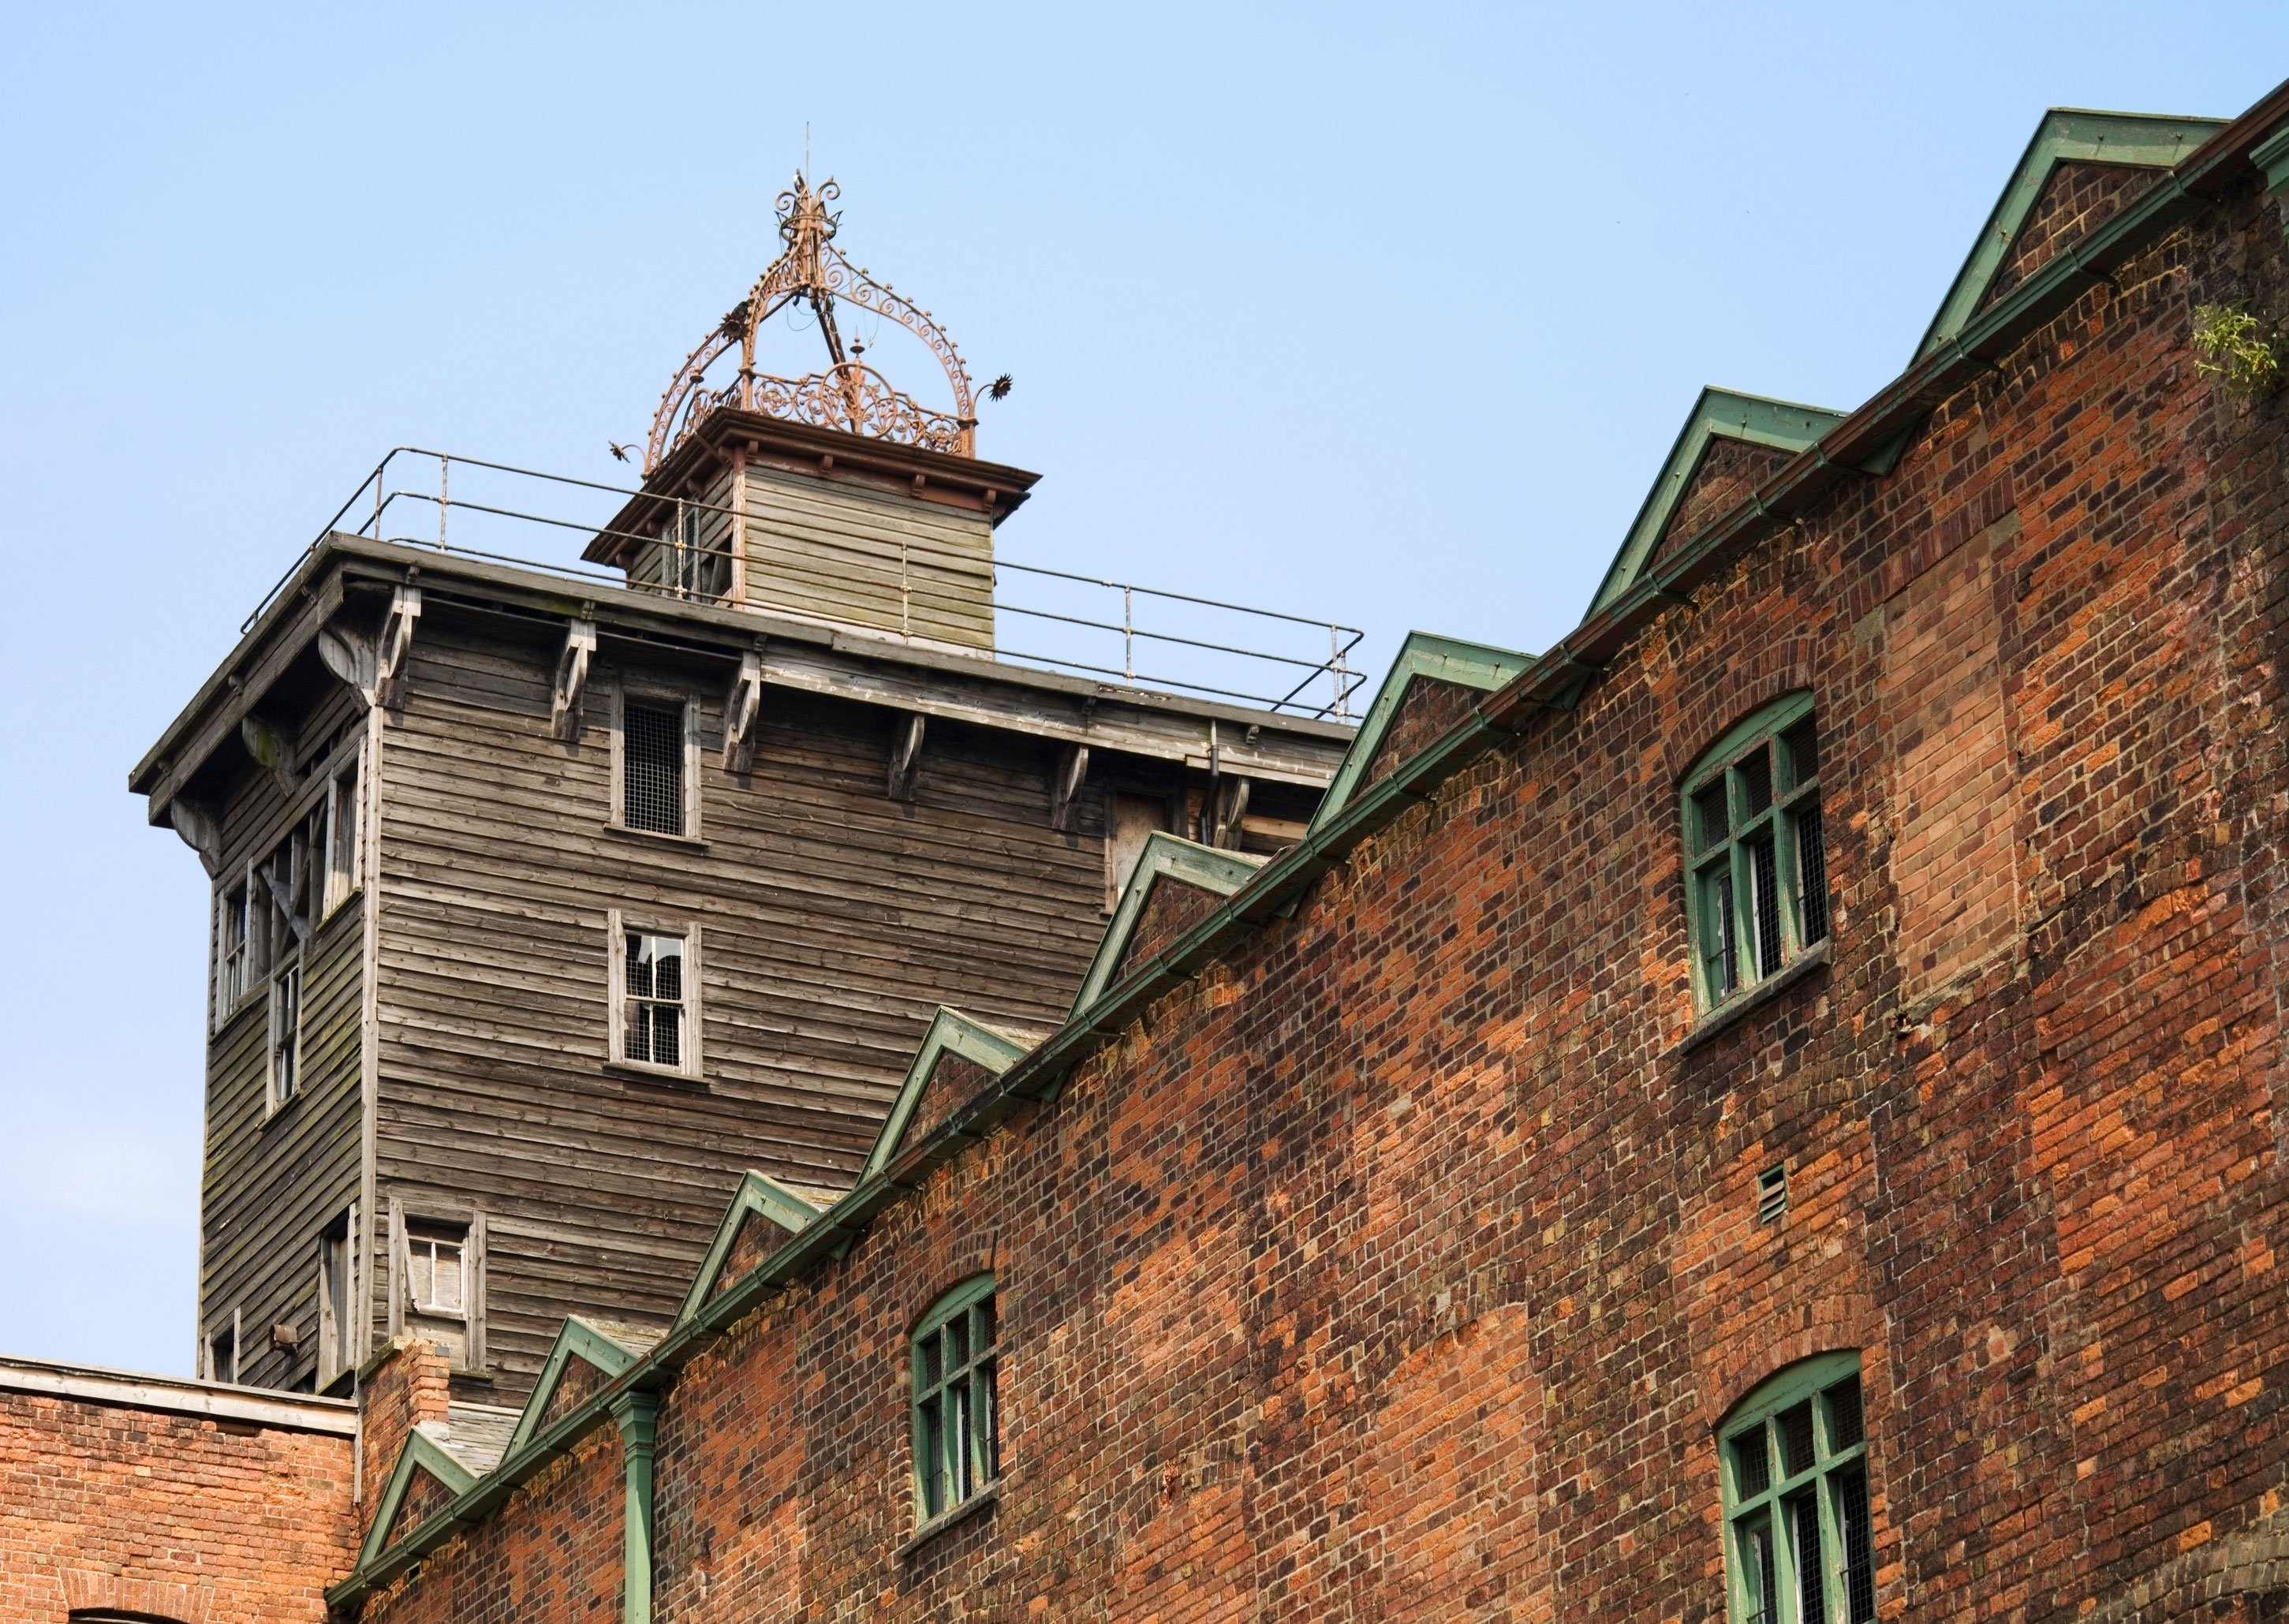 Exterior view of looking up at red brick industrial building with a wooden turret on top.